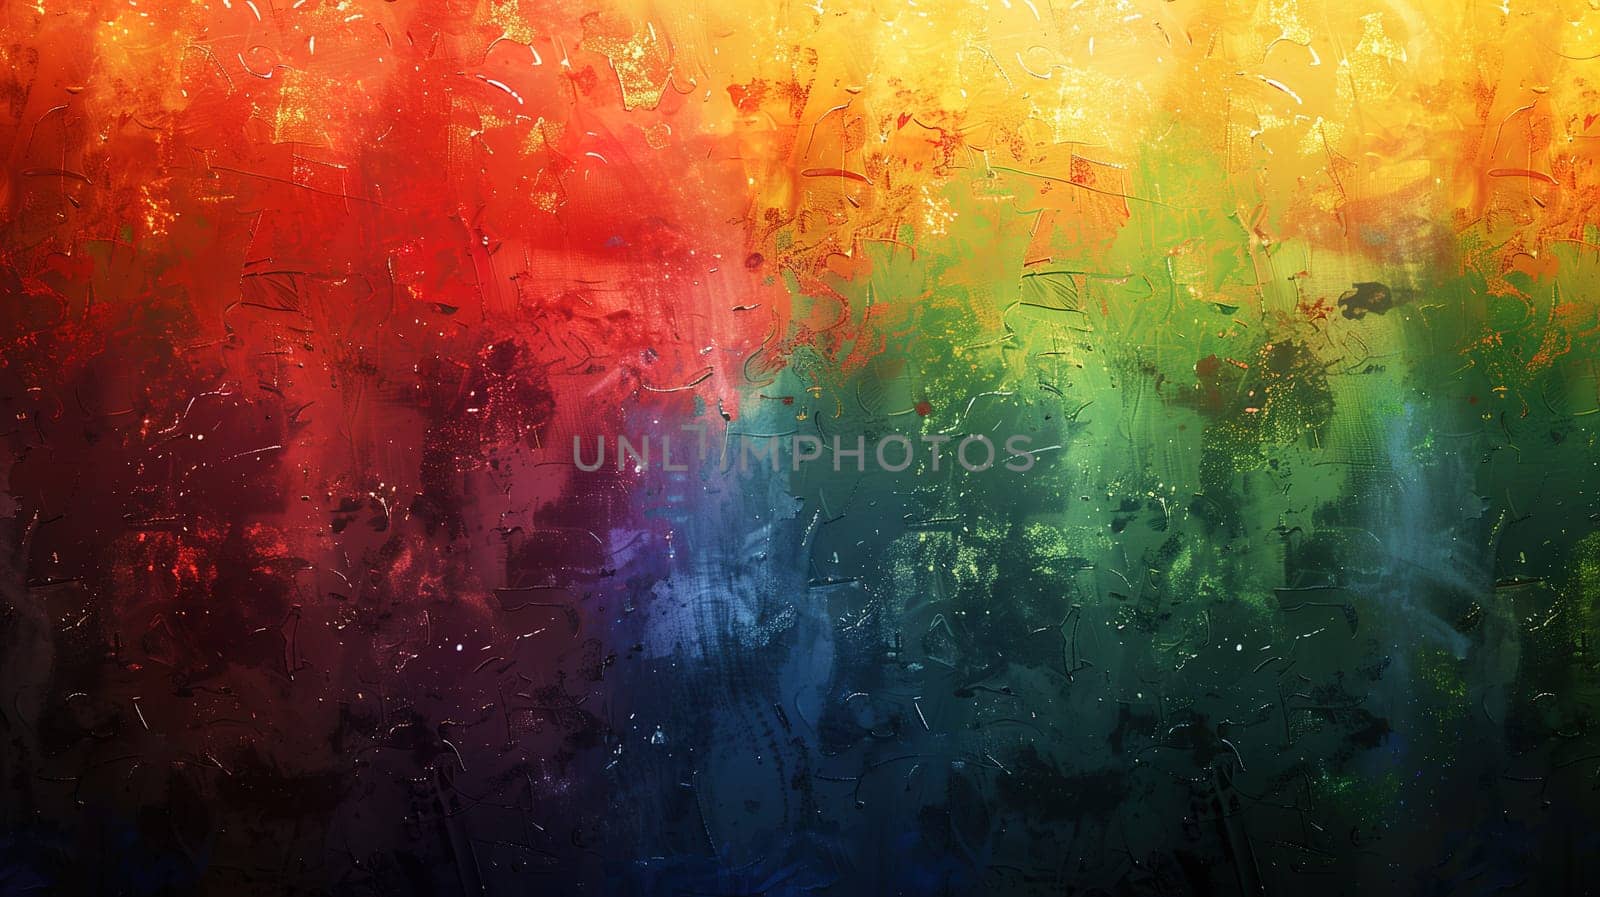 A painting featuring a vibrant rainbow-colored background, representing the lgbt pride concept. The colors of the rainbow blend seamlessly, creating a striking visual impact.